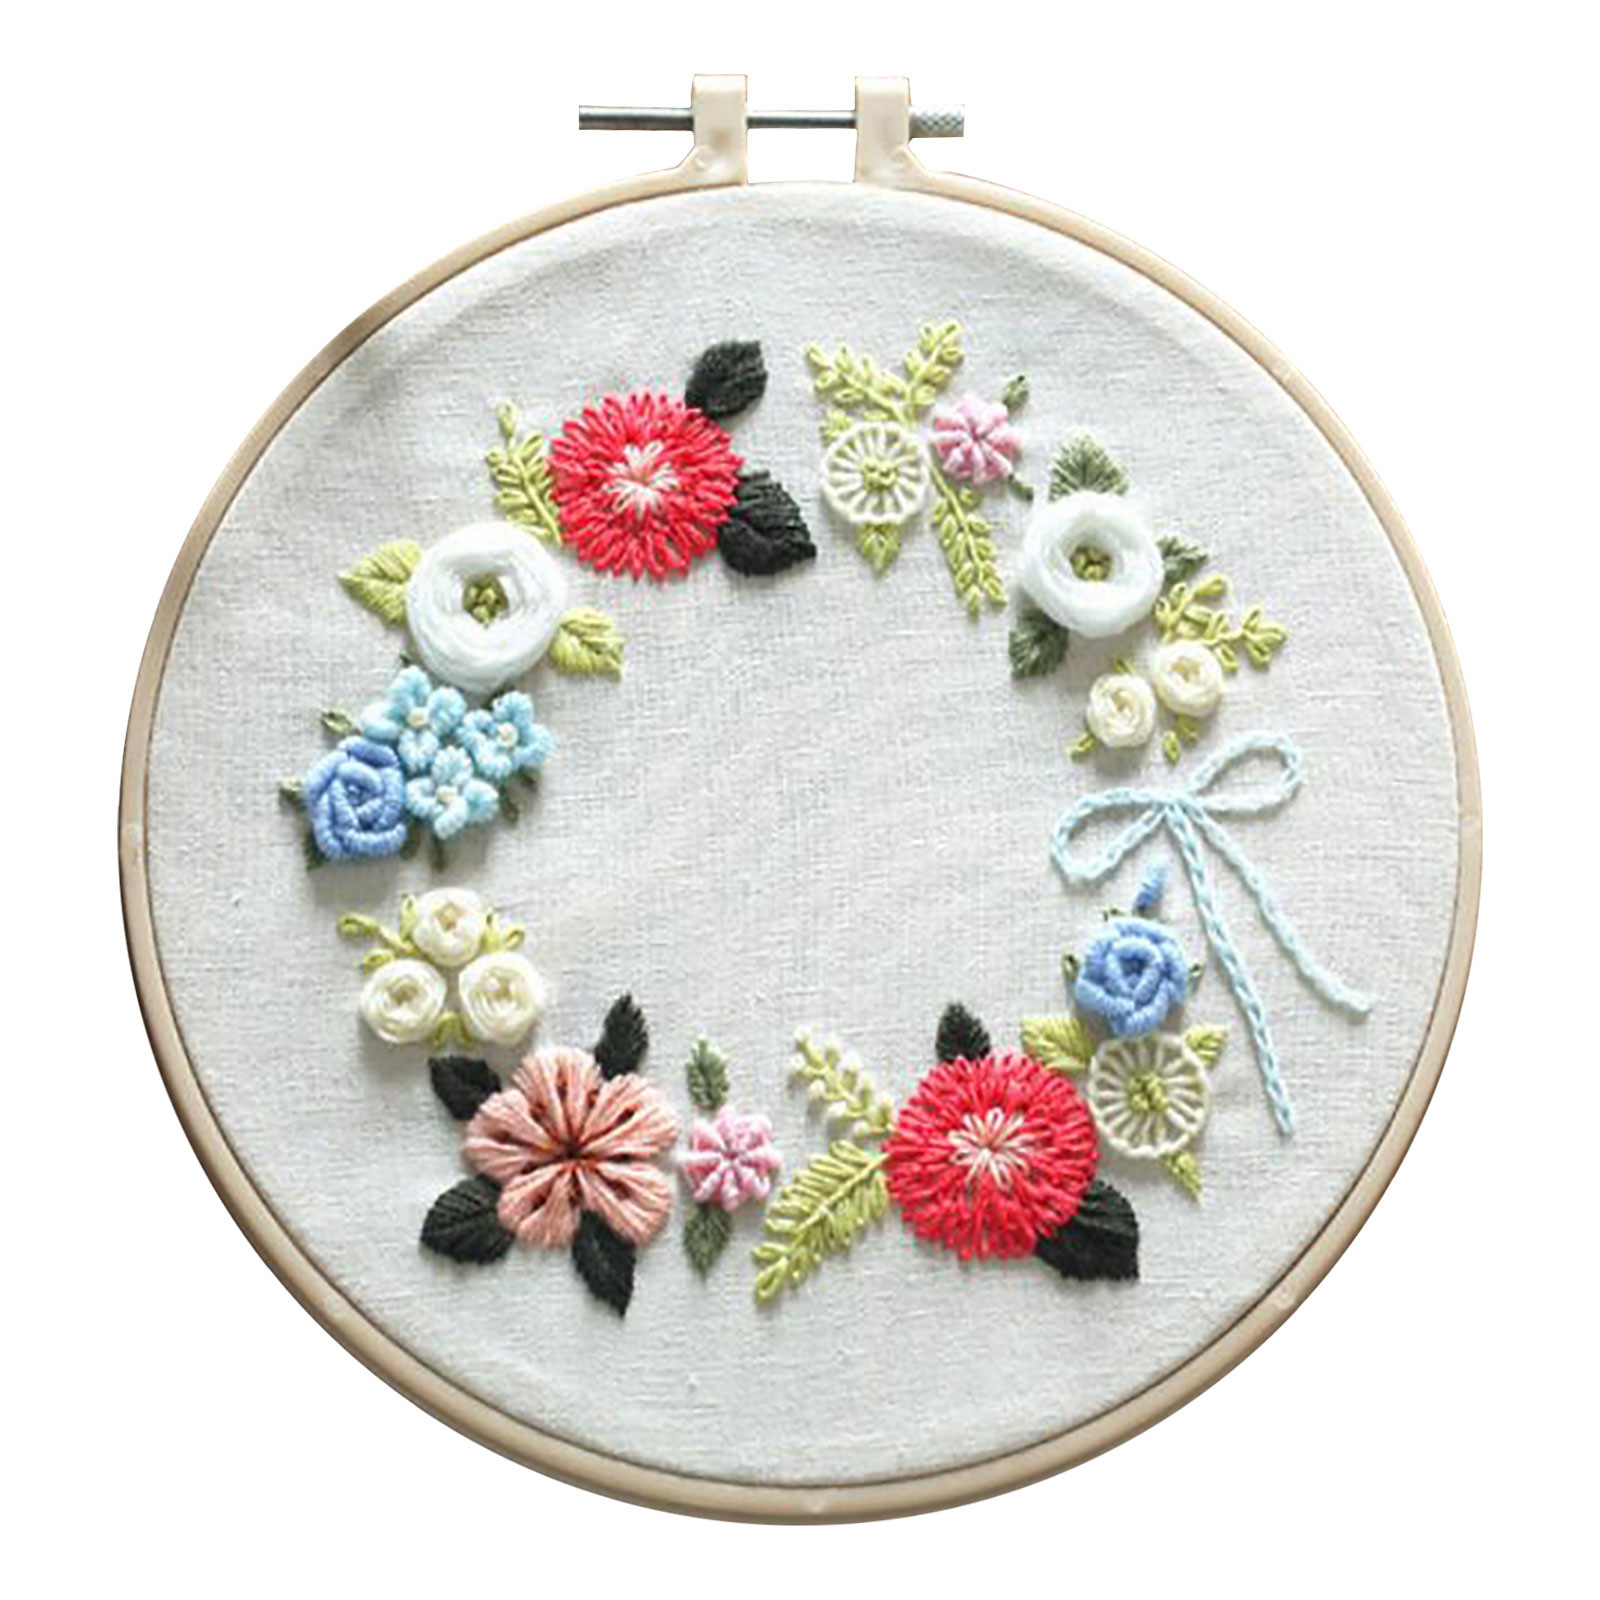 Chiccall Home Decor Cross Stitch Tools and Beginner Embroidery Kits for Adults and Children Gifts for Girls Boys Kids Adults, Size: 7.87×7.87×